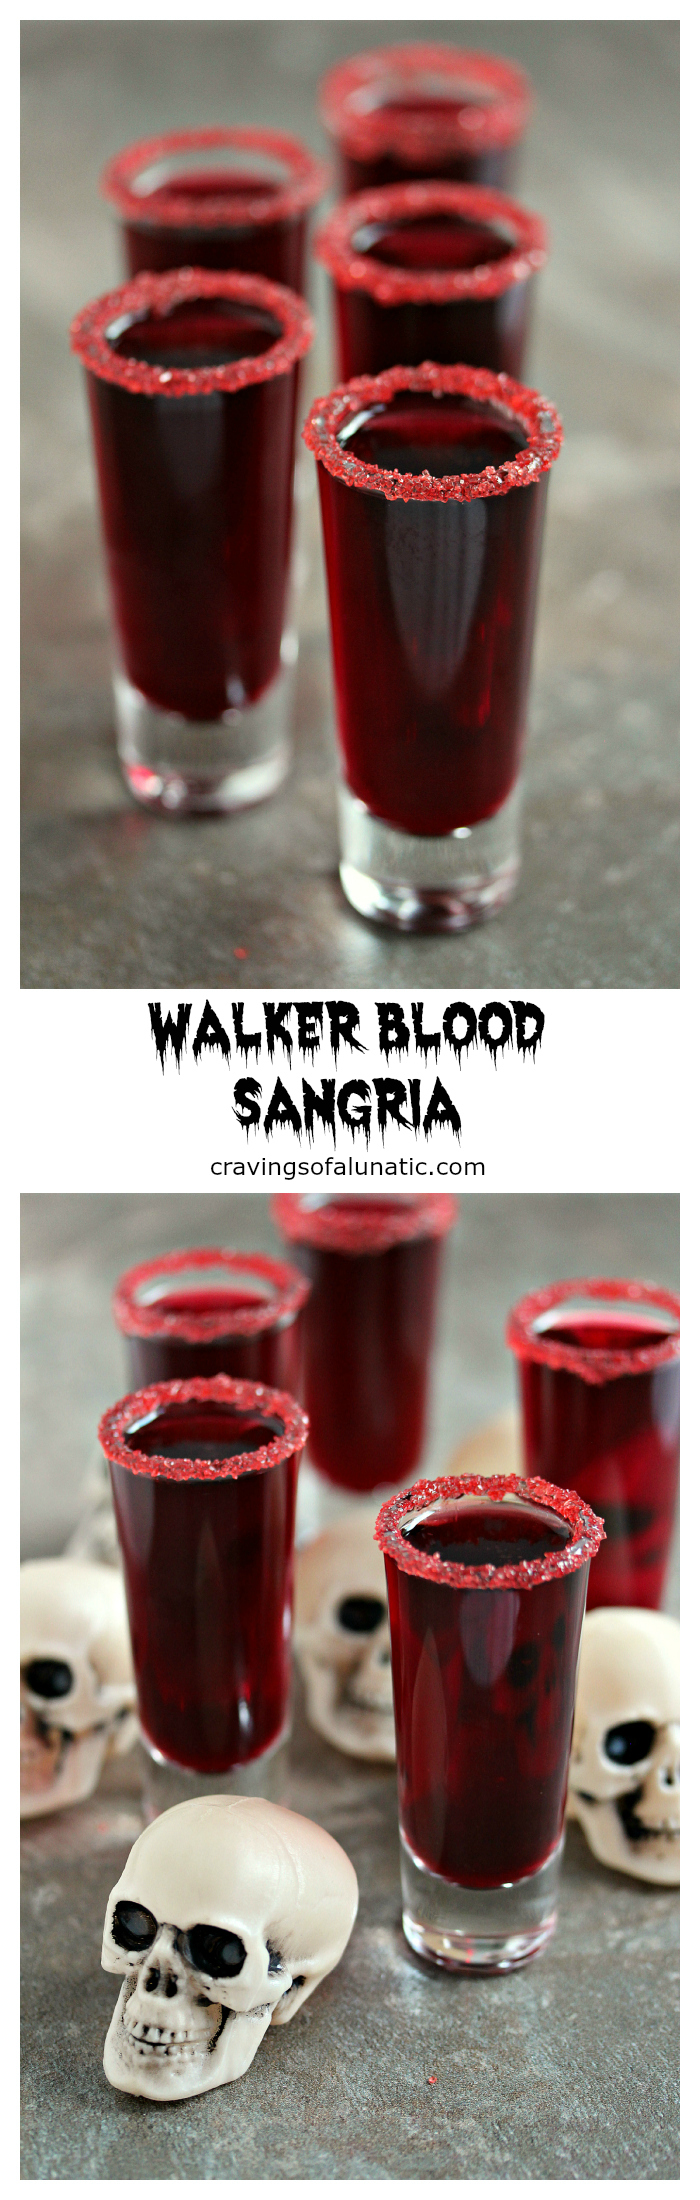 Walker Blood Sangria for Dead Eats: Recipes Inspired by The Walking Dead- Just because the world is ending and there's walkers everywhere that's no excuse not to entertain in style. Lock the doors, turn out the lights and sip this Walker Blood Sangria. A little wine, a little pomegranate juice and you've got a party.